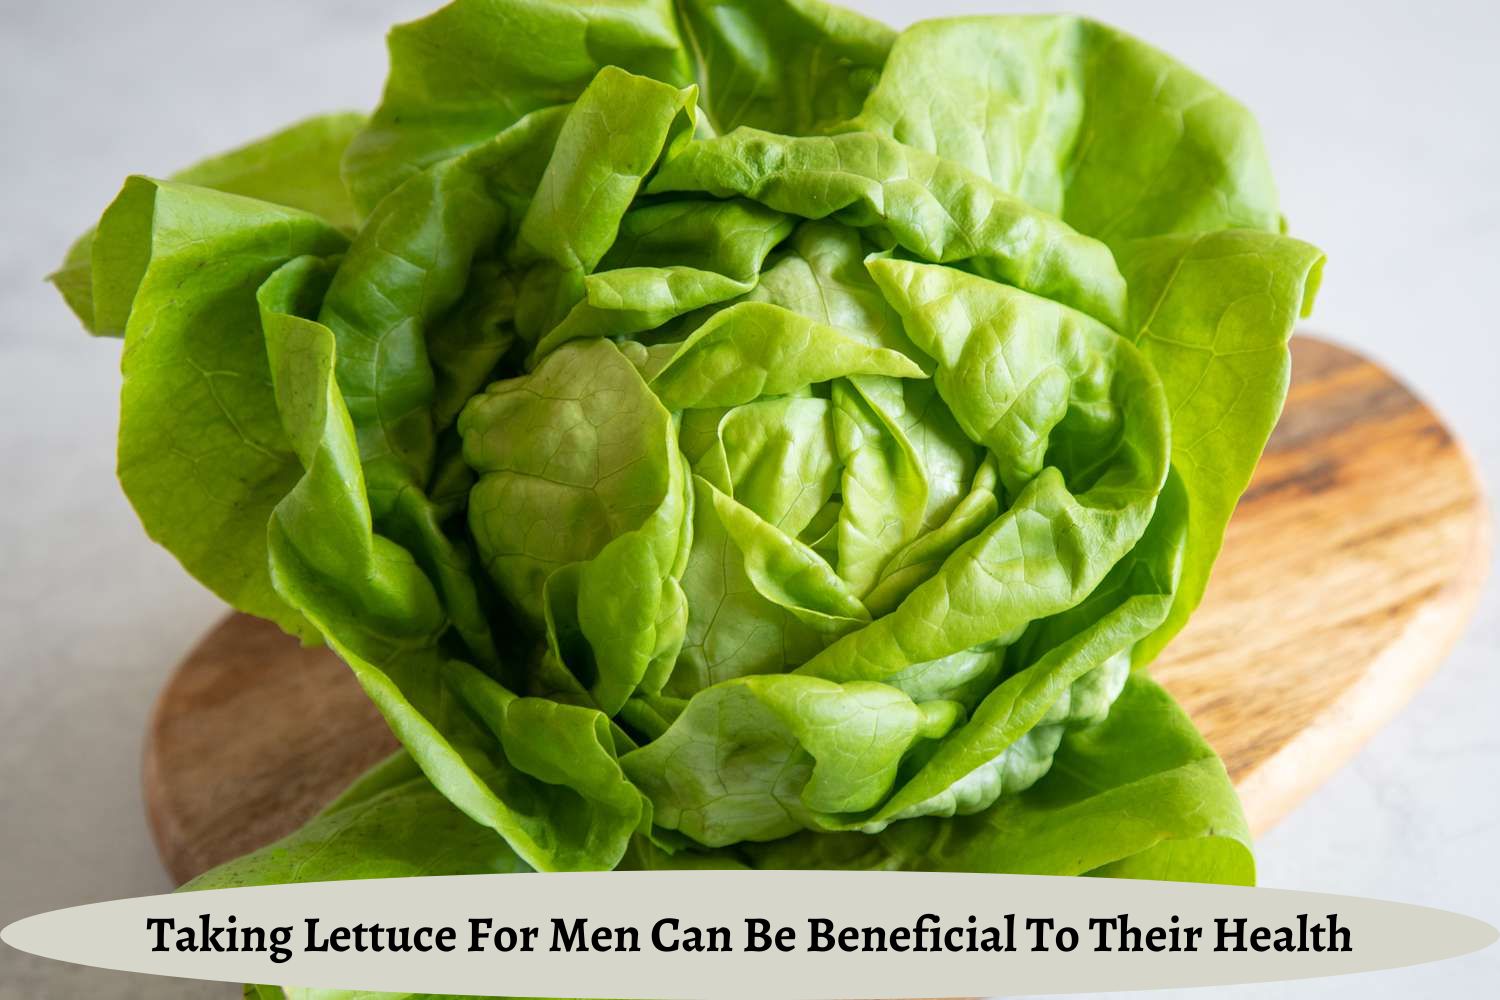 Taking Lettuce For Men Can Be Beneficial To Their Health